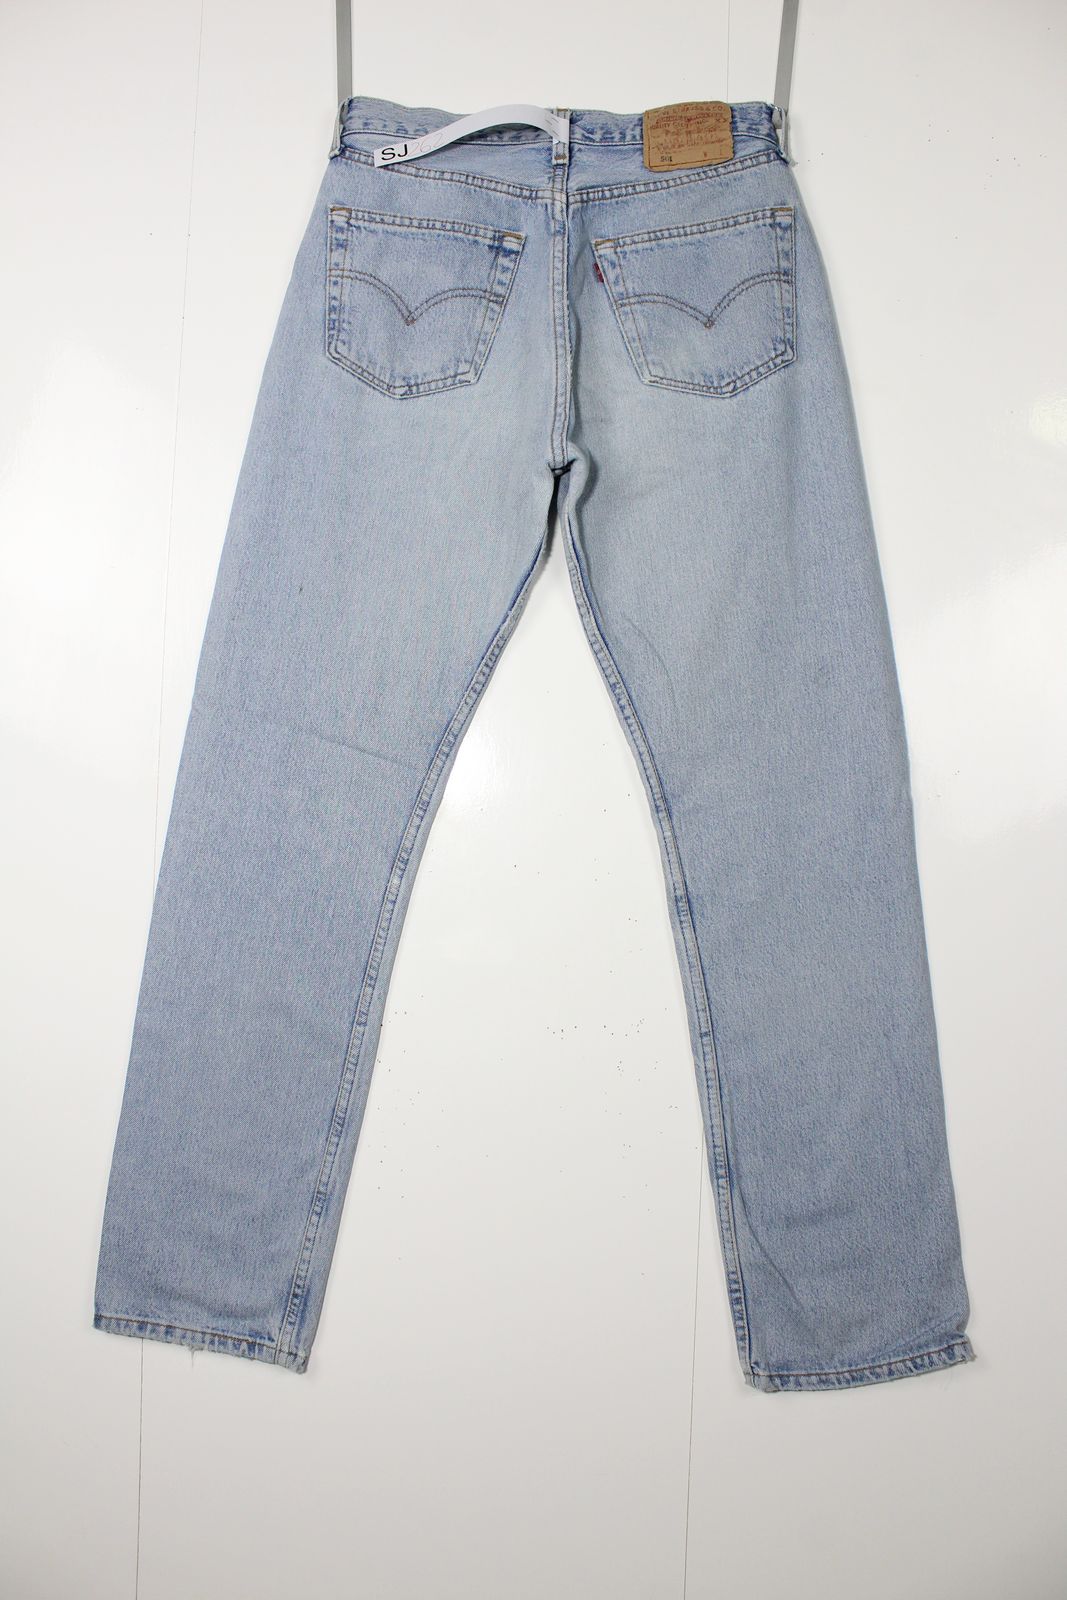 Levi's 501 For Women Denim W31 L32 Made In USA Jeans Vintage